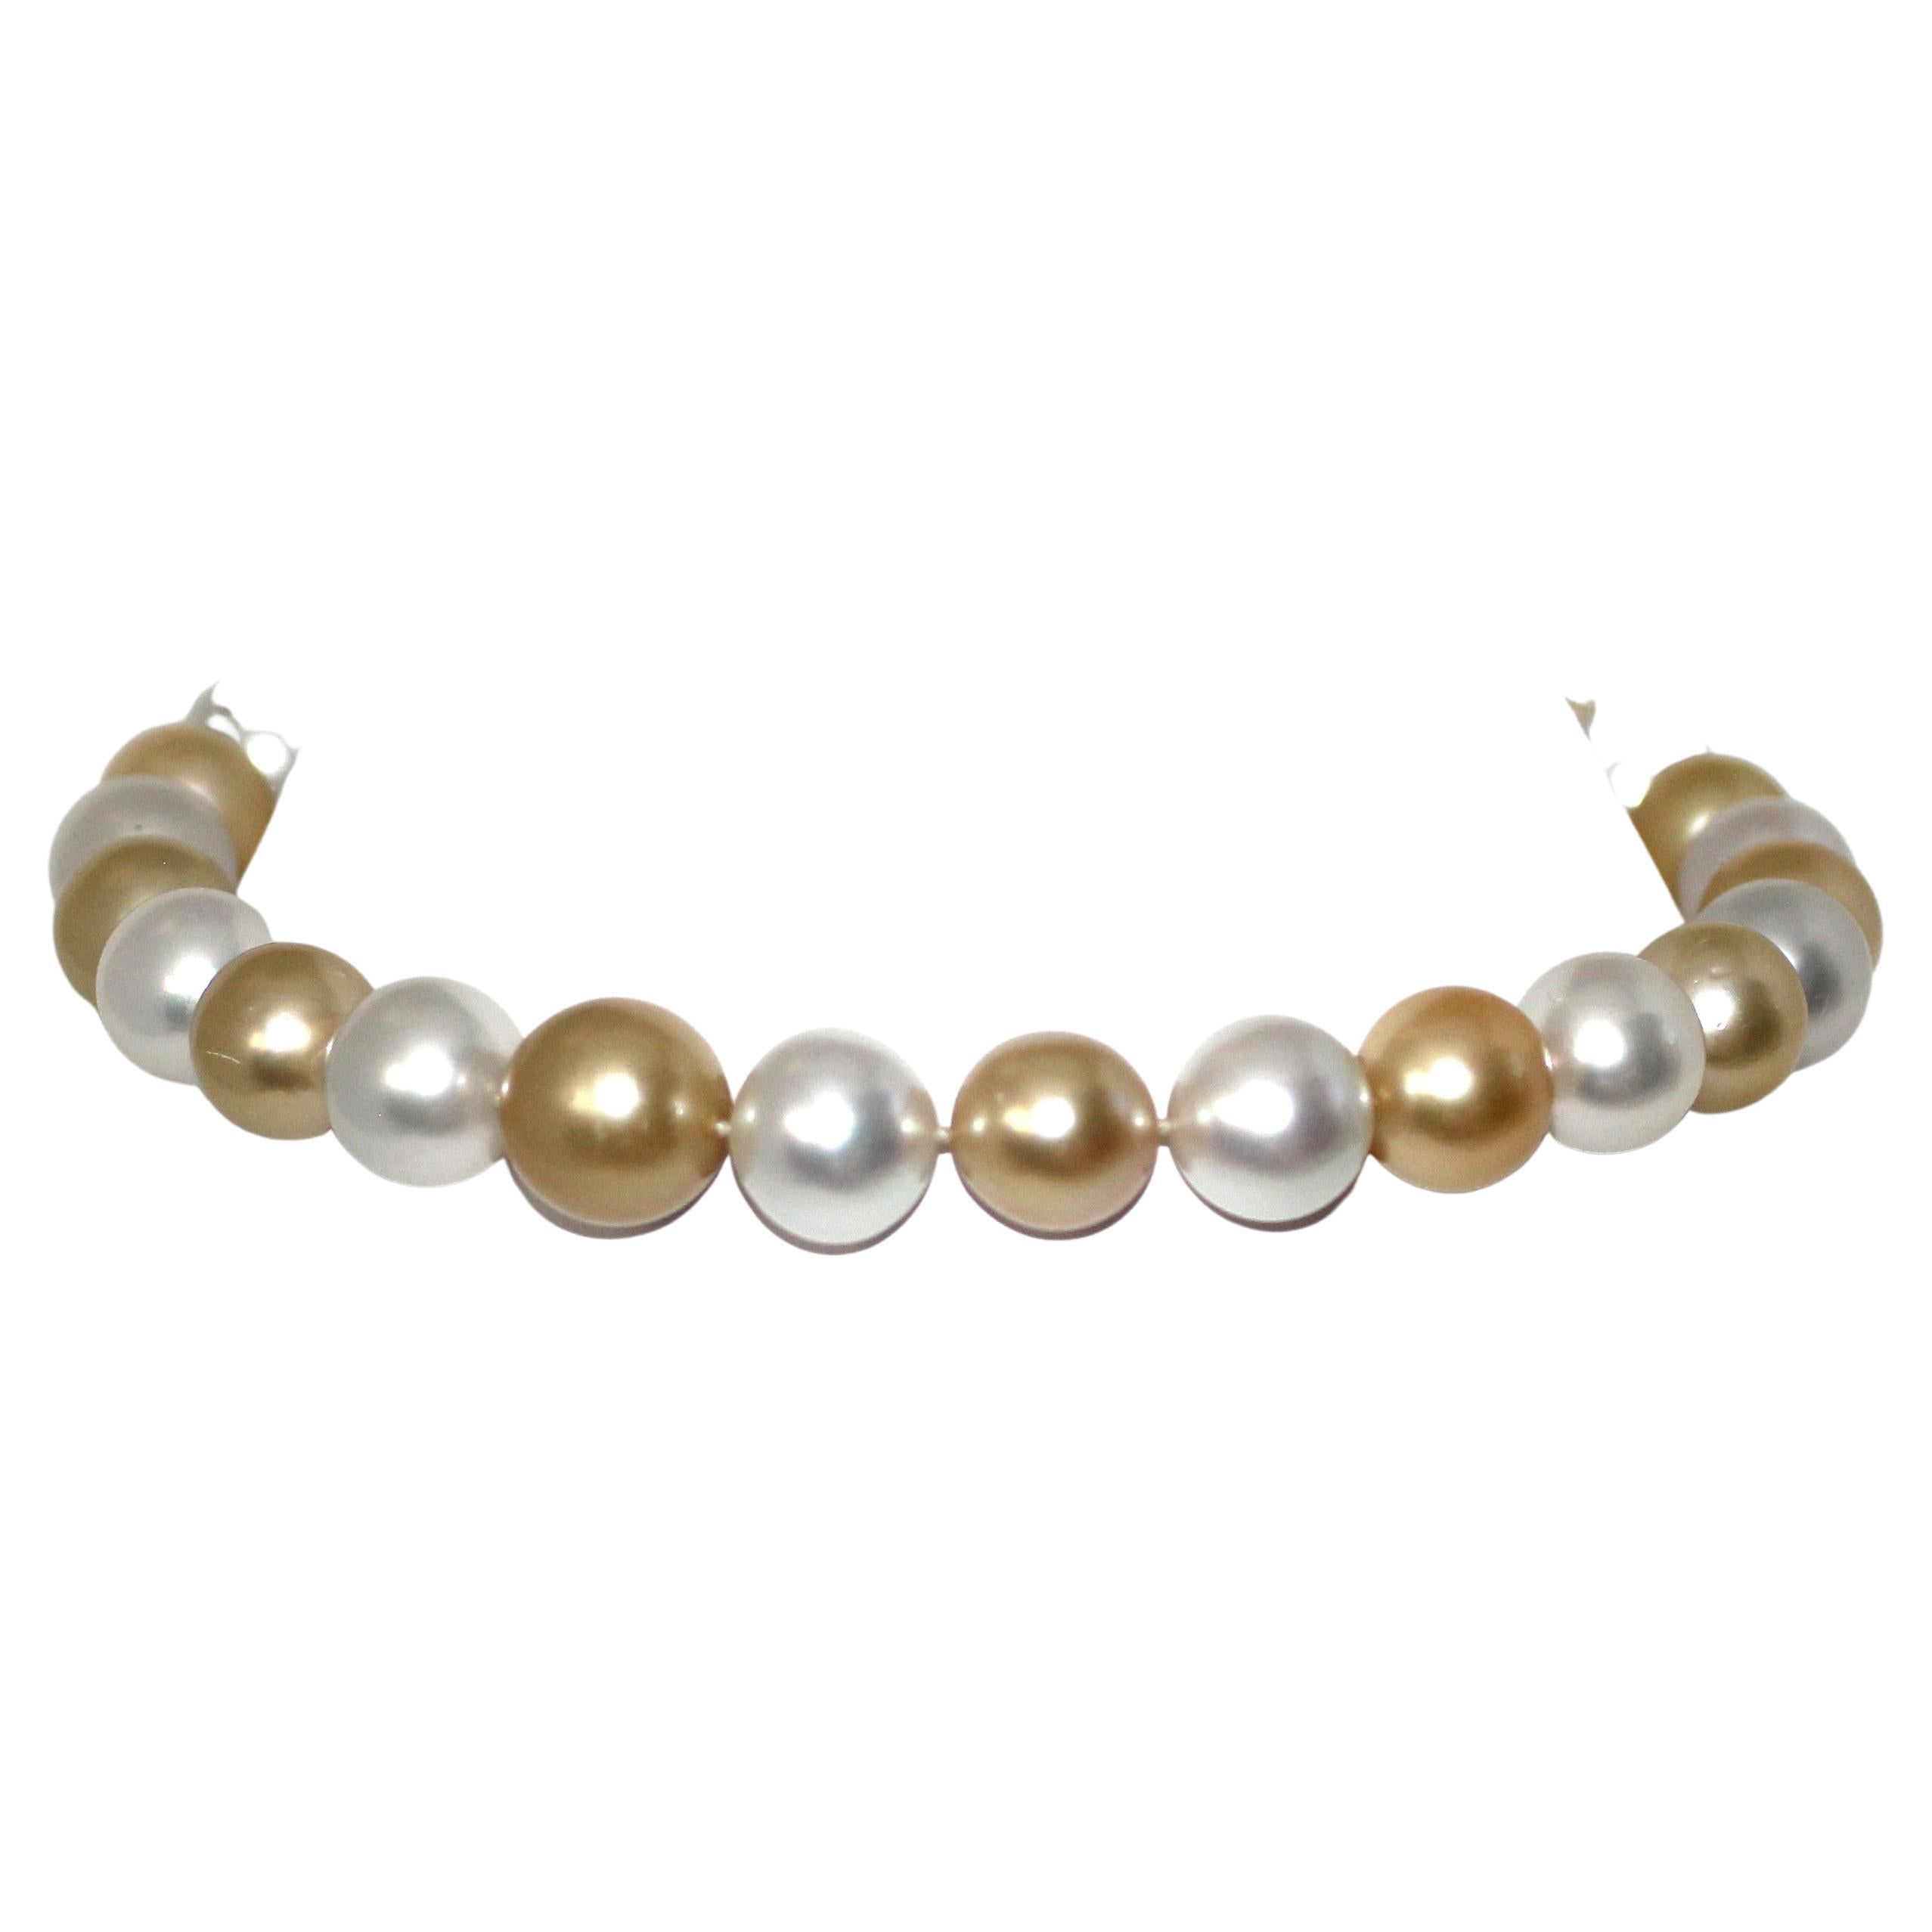 Hakimoto 17x14 mm White & Golden South Sea Pearl Necklace For Sale